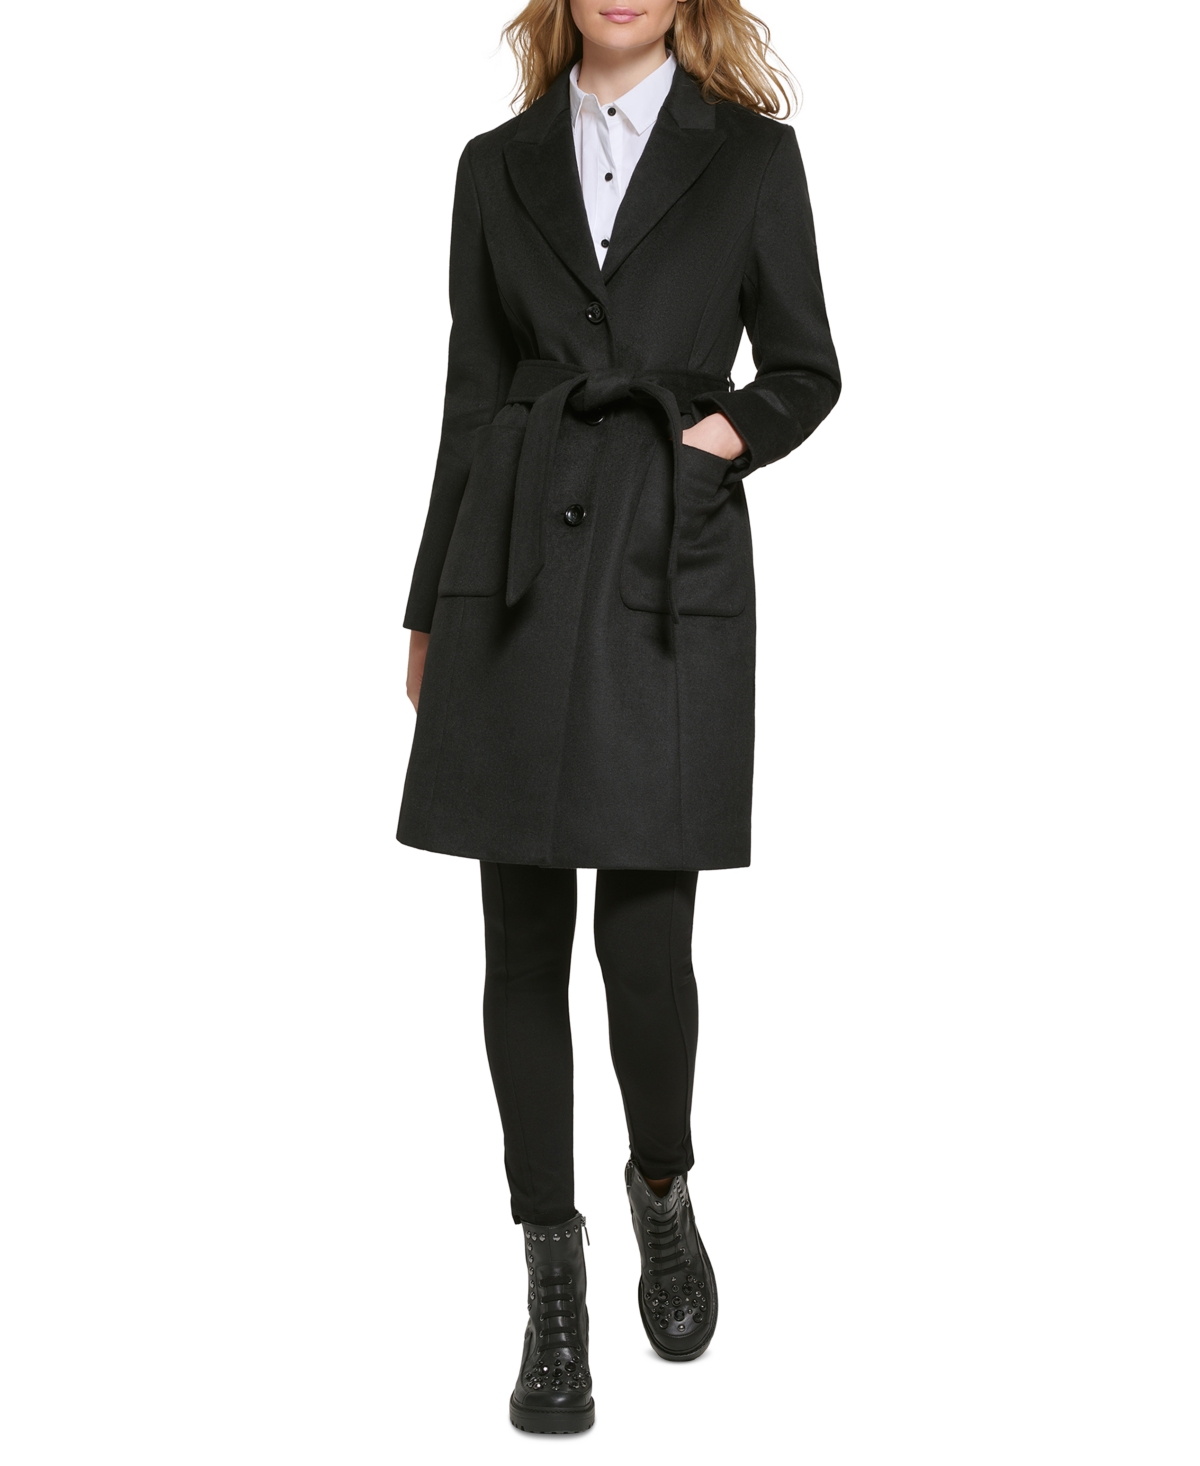 KARL LAGERFELD WOMEN'S BELTED NOTCHED-COLLAR WRAP COAT